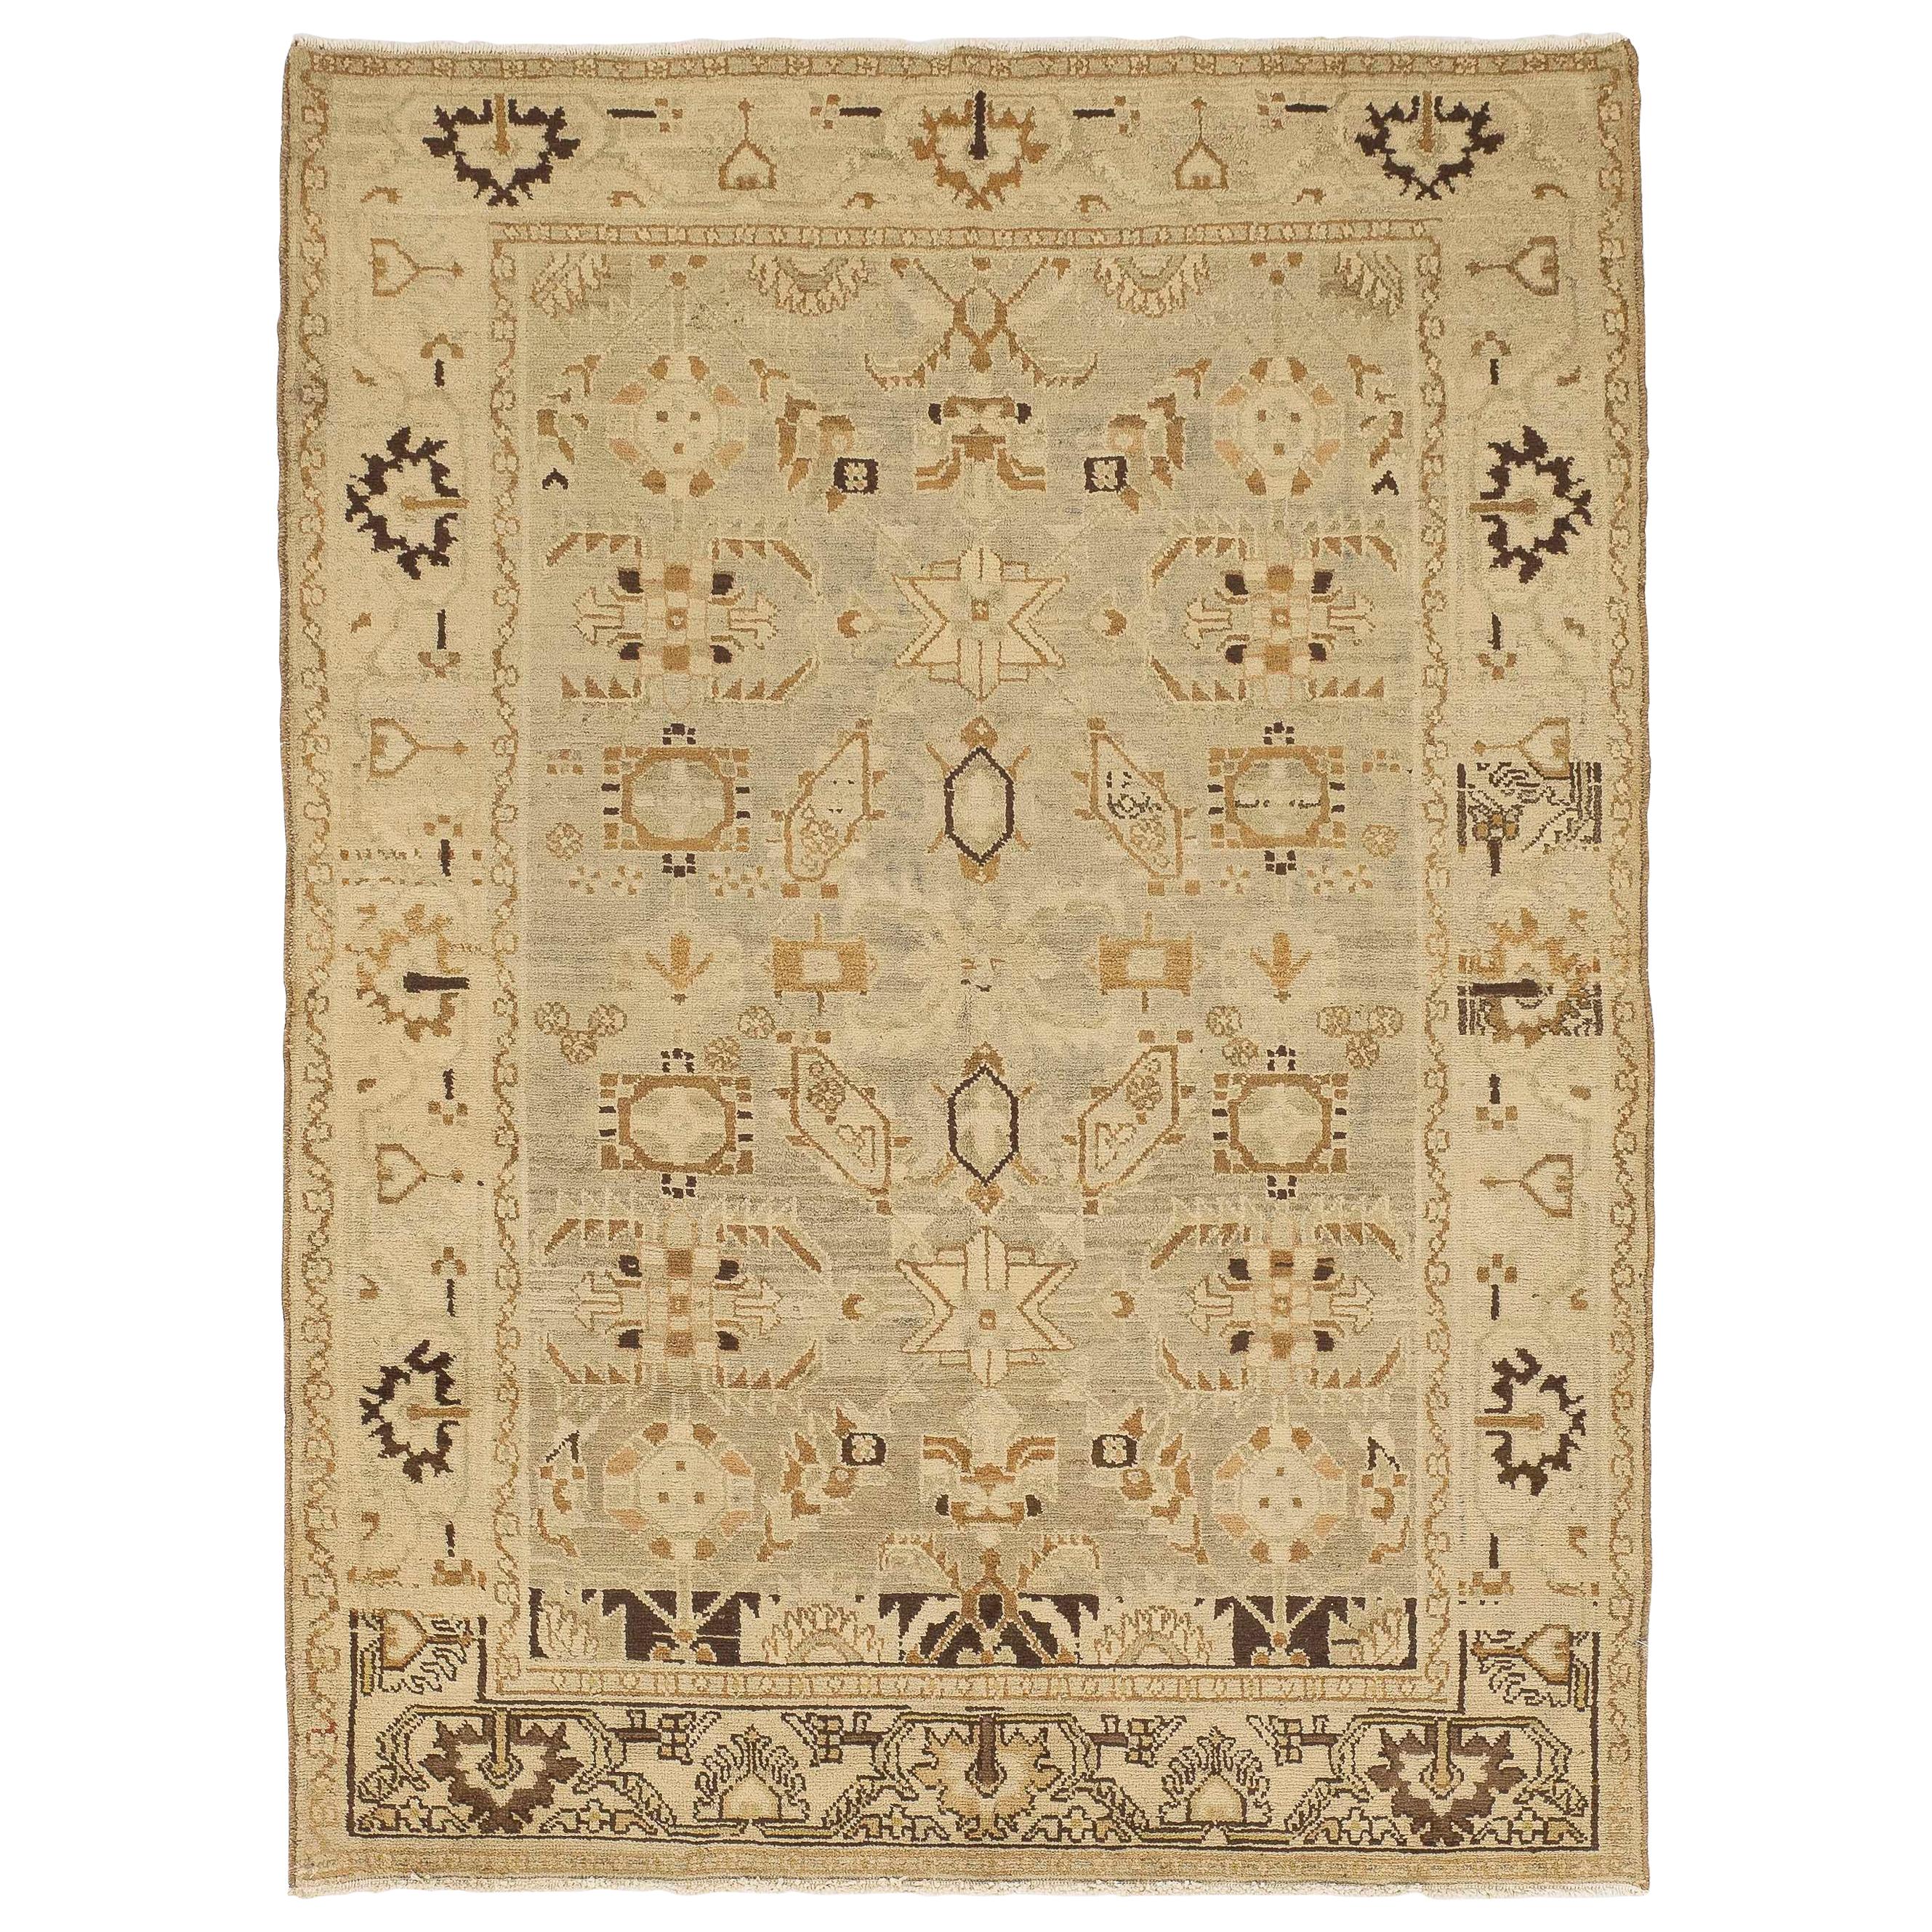 Antique Persian Malayer Rug with Brown and Beige Tribal Motifs on Ivory Field